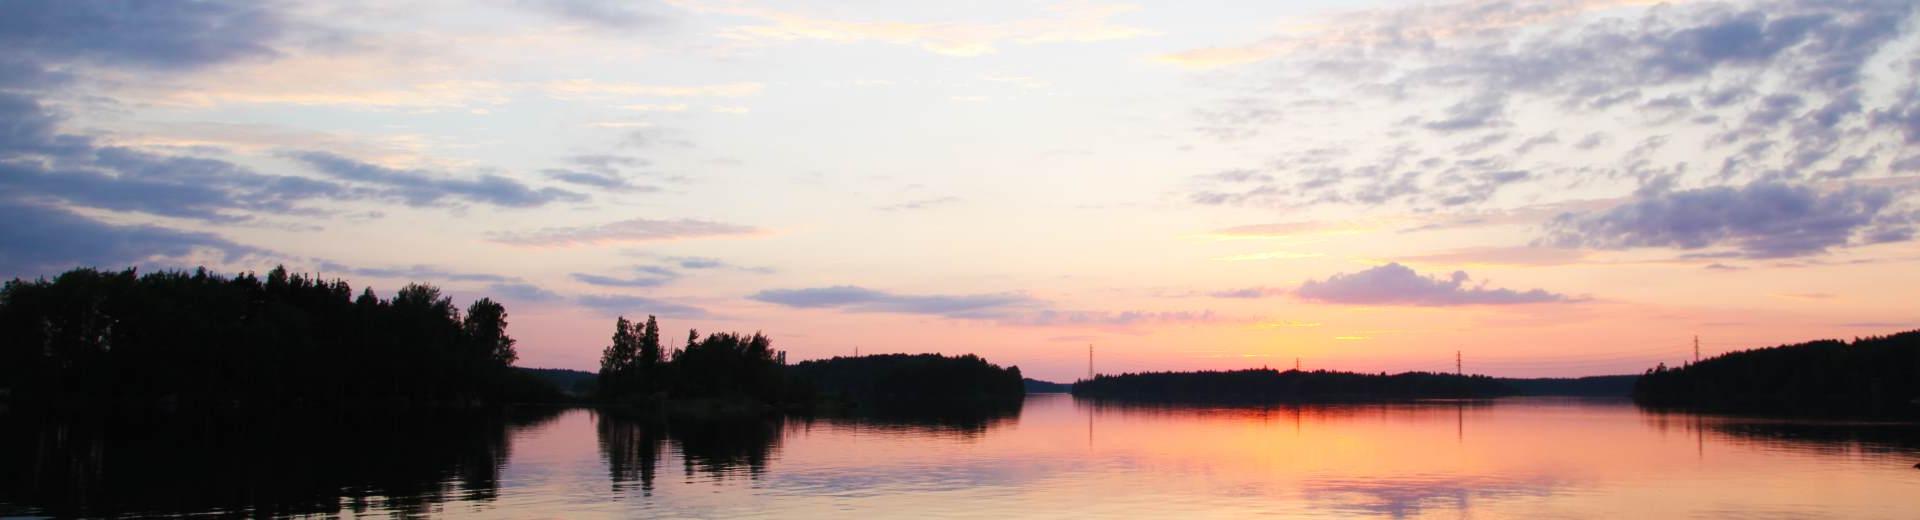 Find the perfect vacation home on the shores of Saimaa and more Finnish lakes - Casamundo